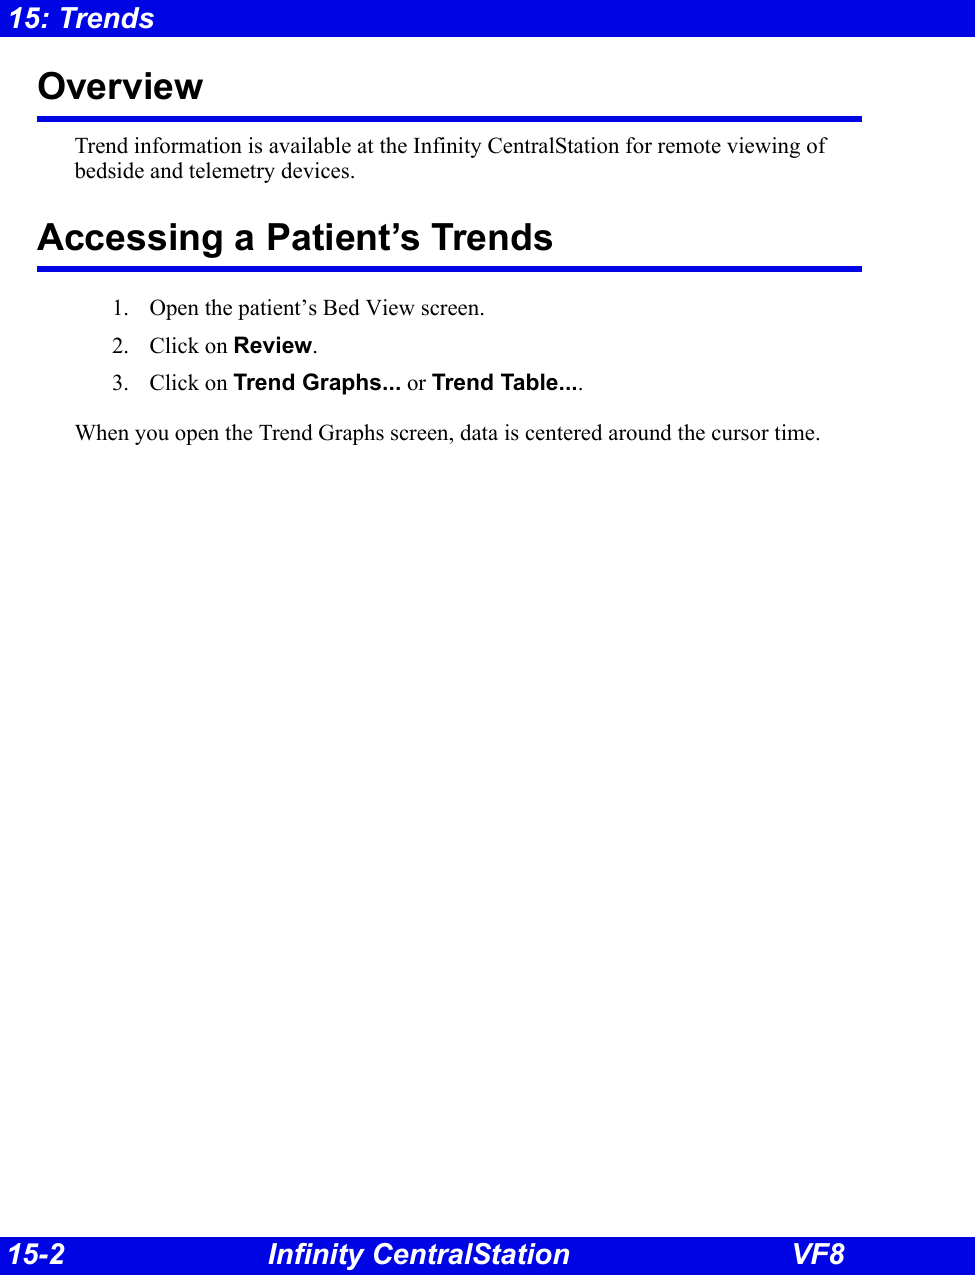 15-2 Infinity CentralStation VF815: TrendsOverview Trend information is available at the Infinity CentralStation for remote viewing of bedside and telemetry devices.Accessing a Patient’s Trends1. Open the patient’s Bed View screen.2. Click on Review.3. Click on Trend Graphs... or Trend Table....When you open the Trend Graphs screen, data is centered around the cursor time.